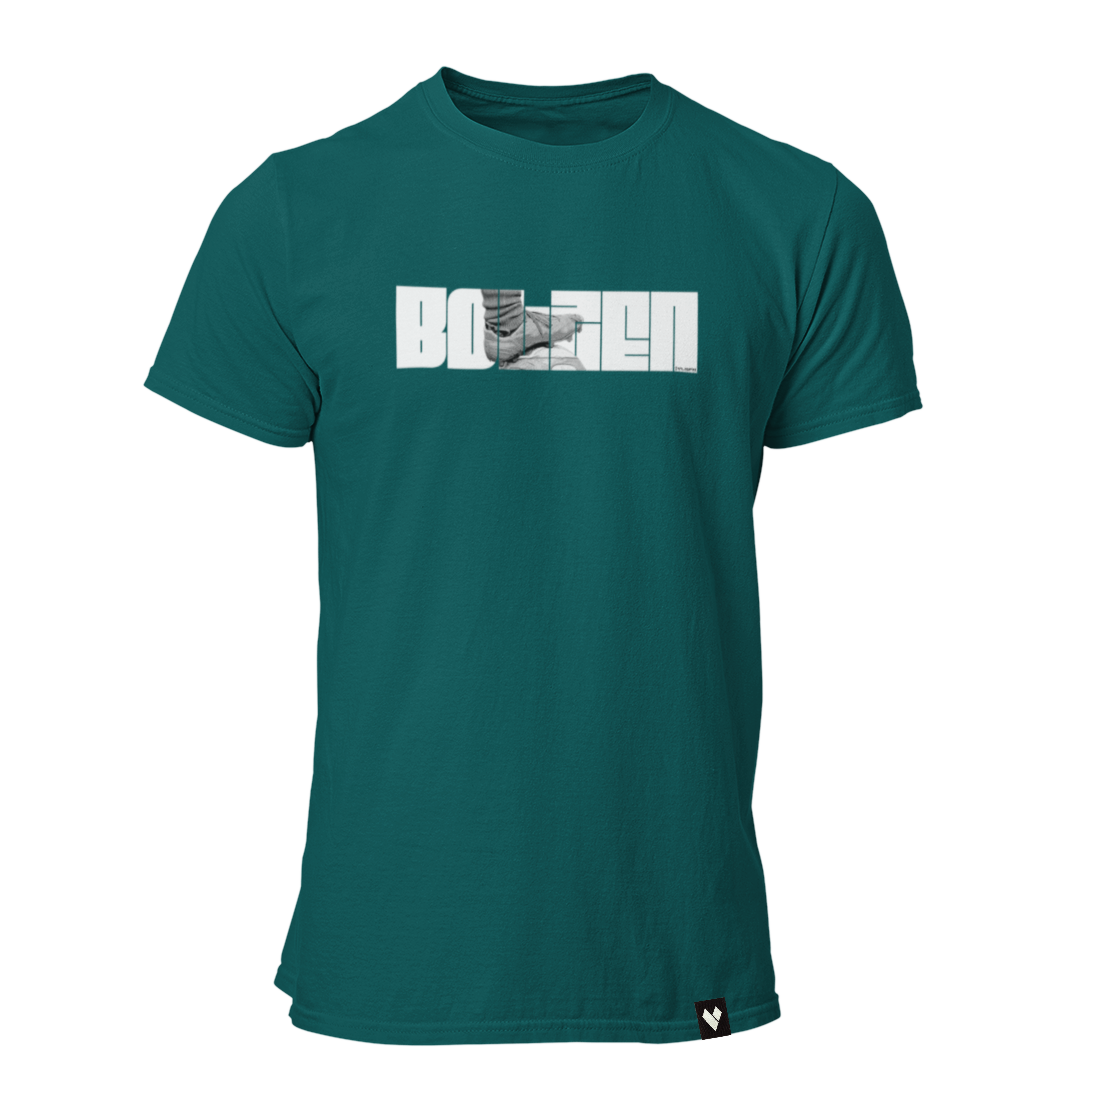 mockup-of-a-ghosted-men-s-t-shirt-in-front-view-29349 - 2021-03-16T121903.507.png